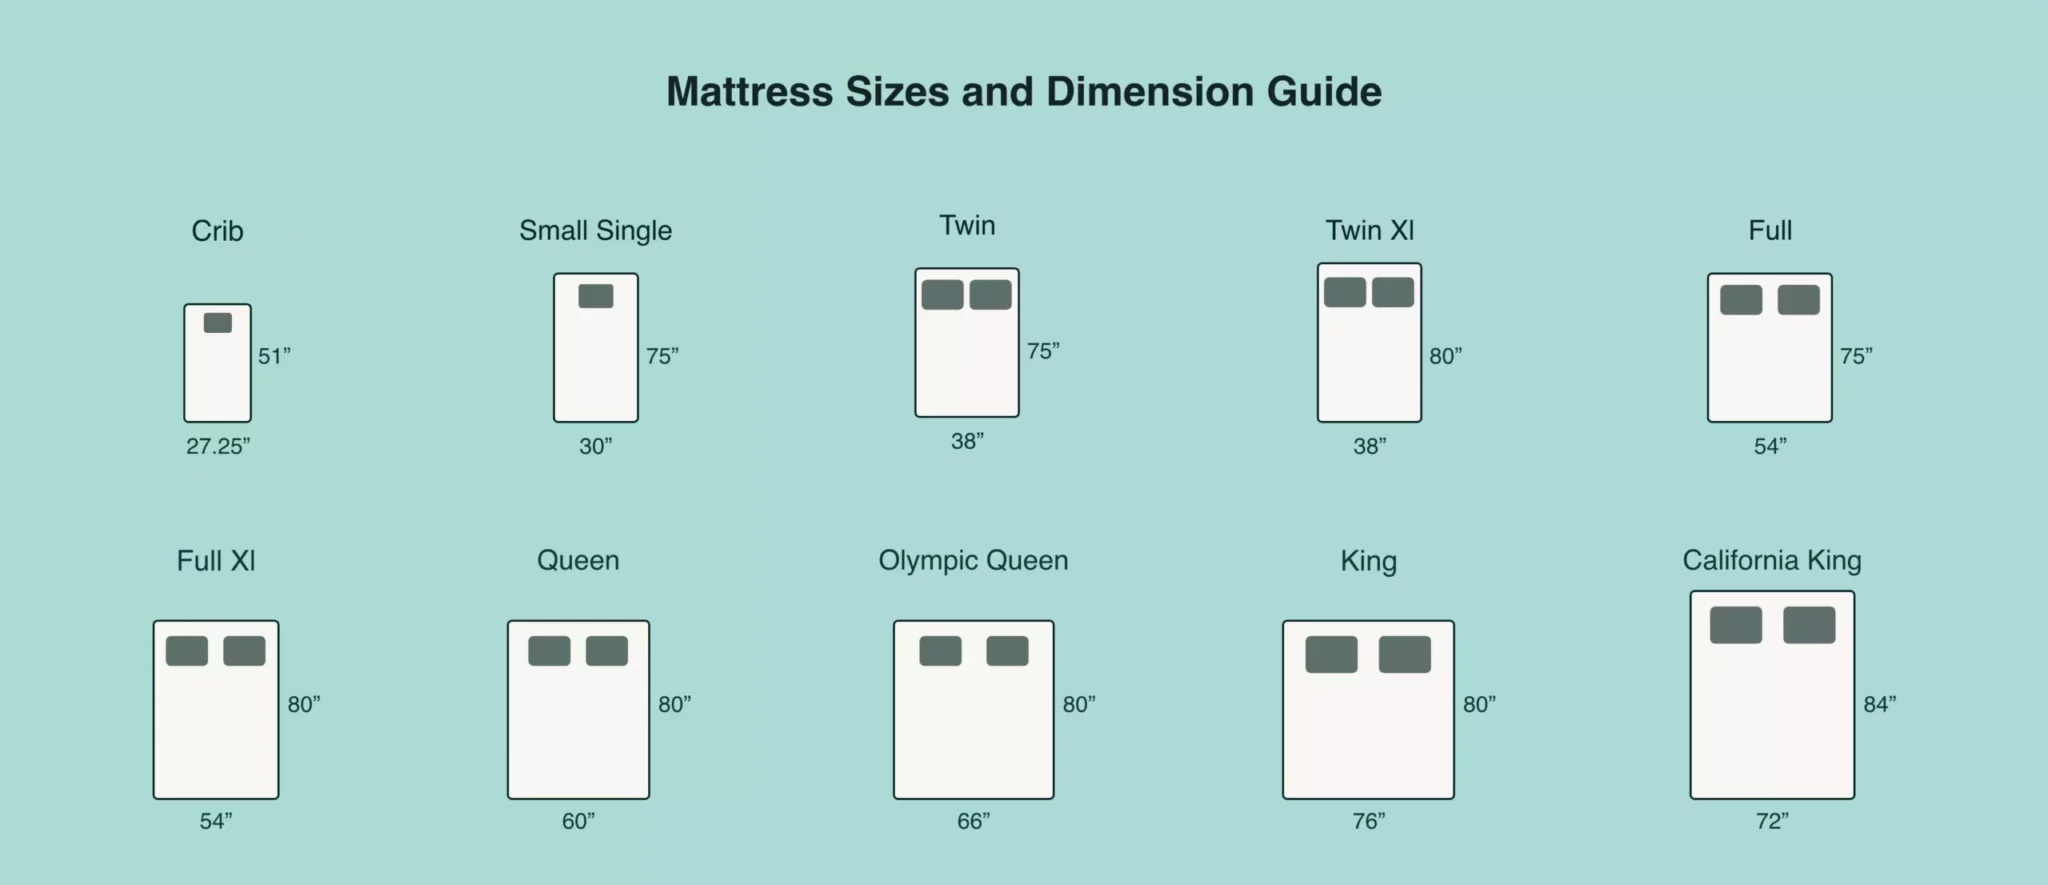 mattress sizes and prices in lagos